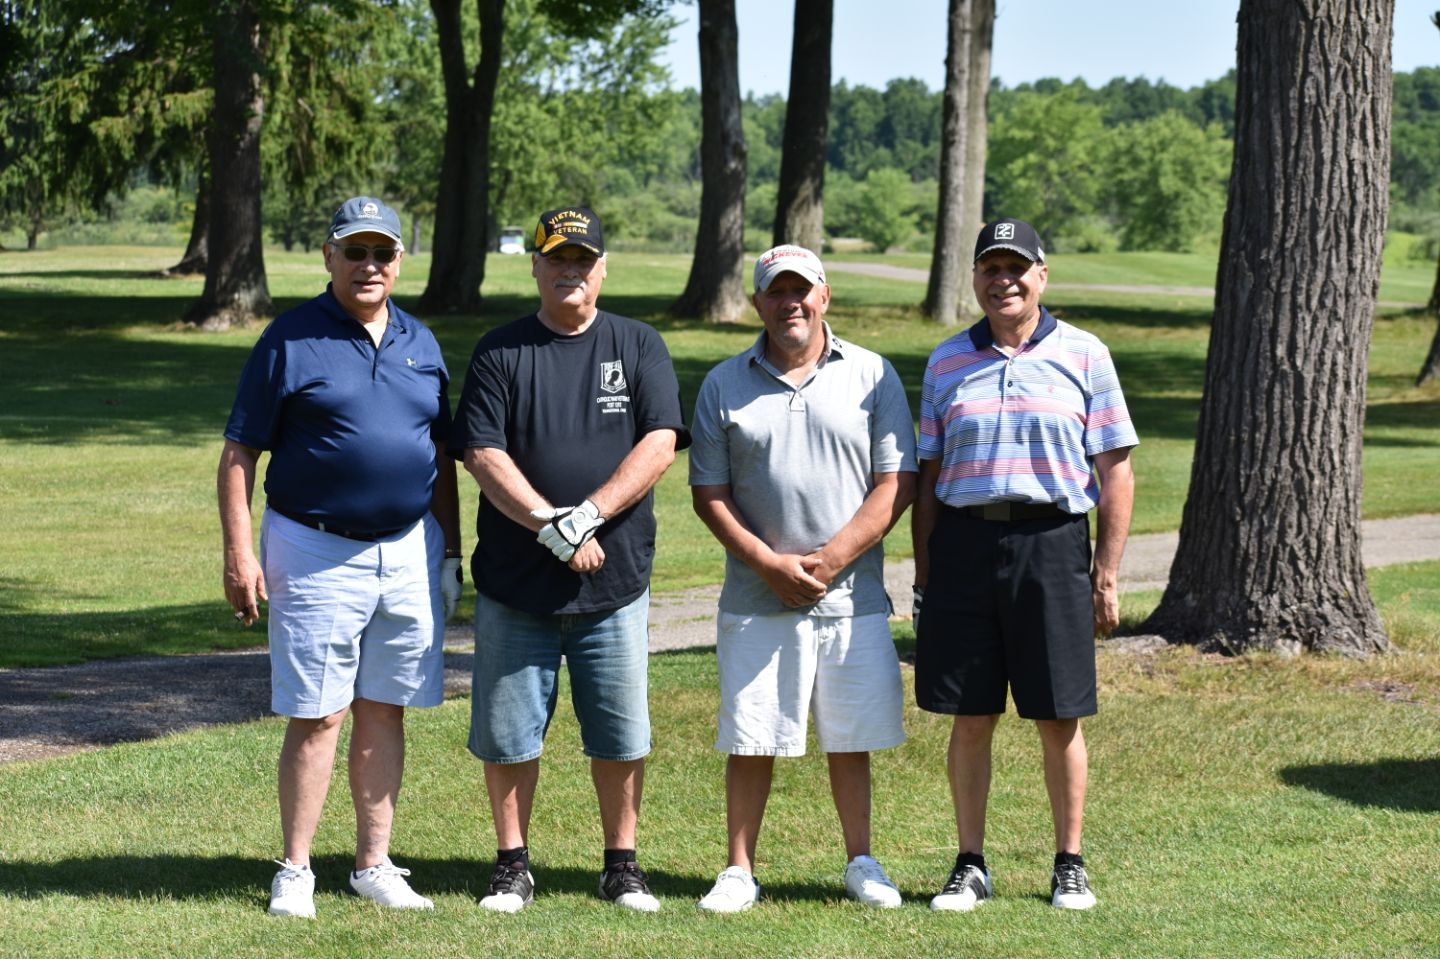 Thank you to Golf Chairman, Jim Stephenson, and Senior Vice Commander, Mike Curtis, for all of their hard work in putting our outing together again. Thank you to all of our teams for coming out to play and to our hole sponsors for their support! We appreciate all the hard work of our volunteers for the day. Thank you to Knoll Run Golf Course for their exceptional services and use of the course. We had a GREAT day!